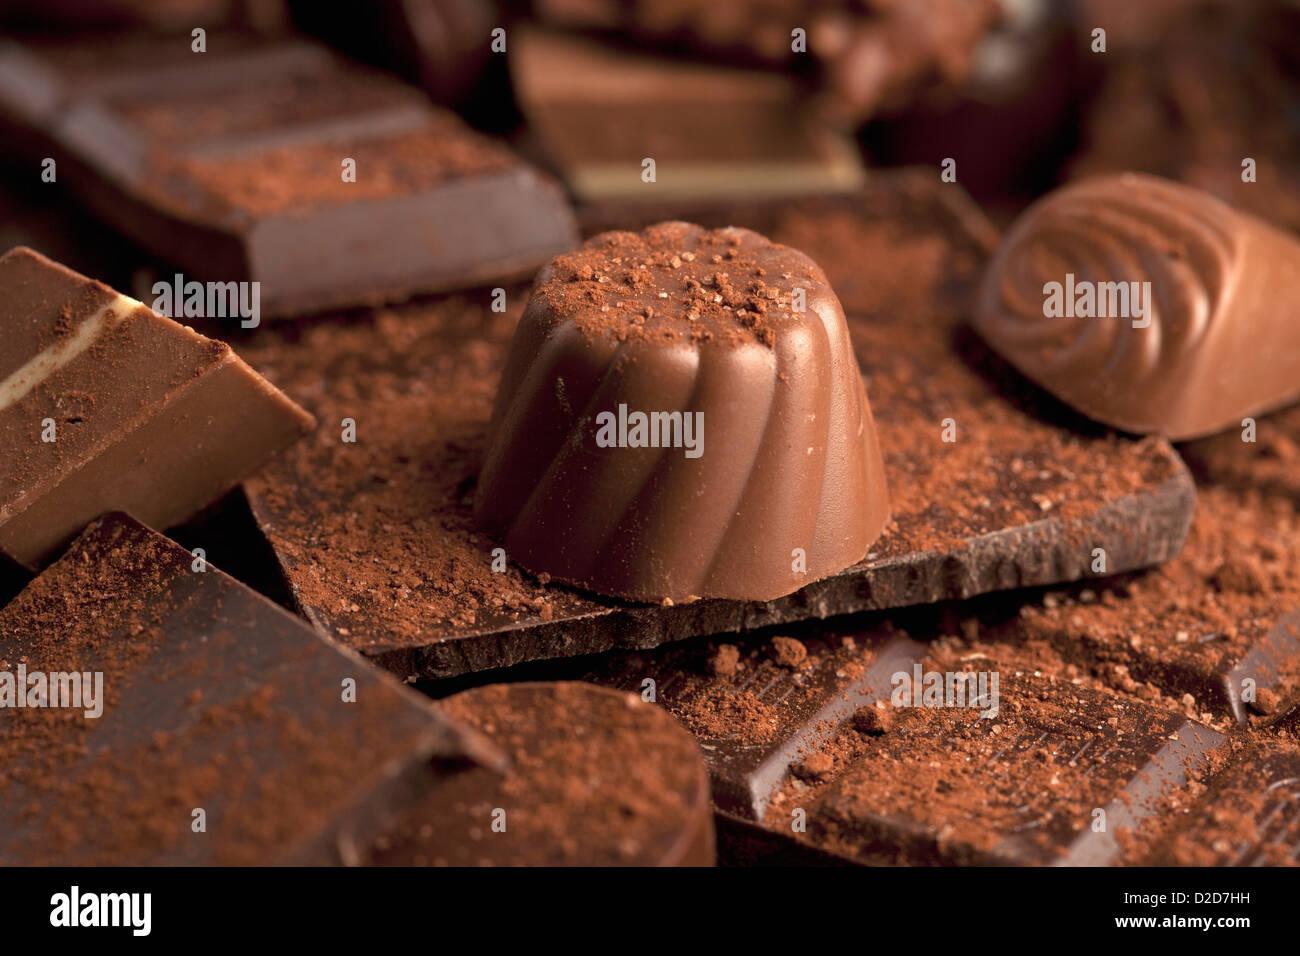 Detail of a pile of chocolates Stock Photo